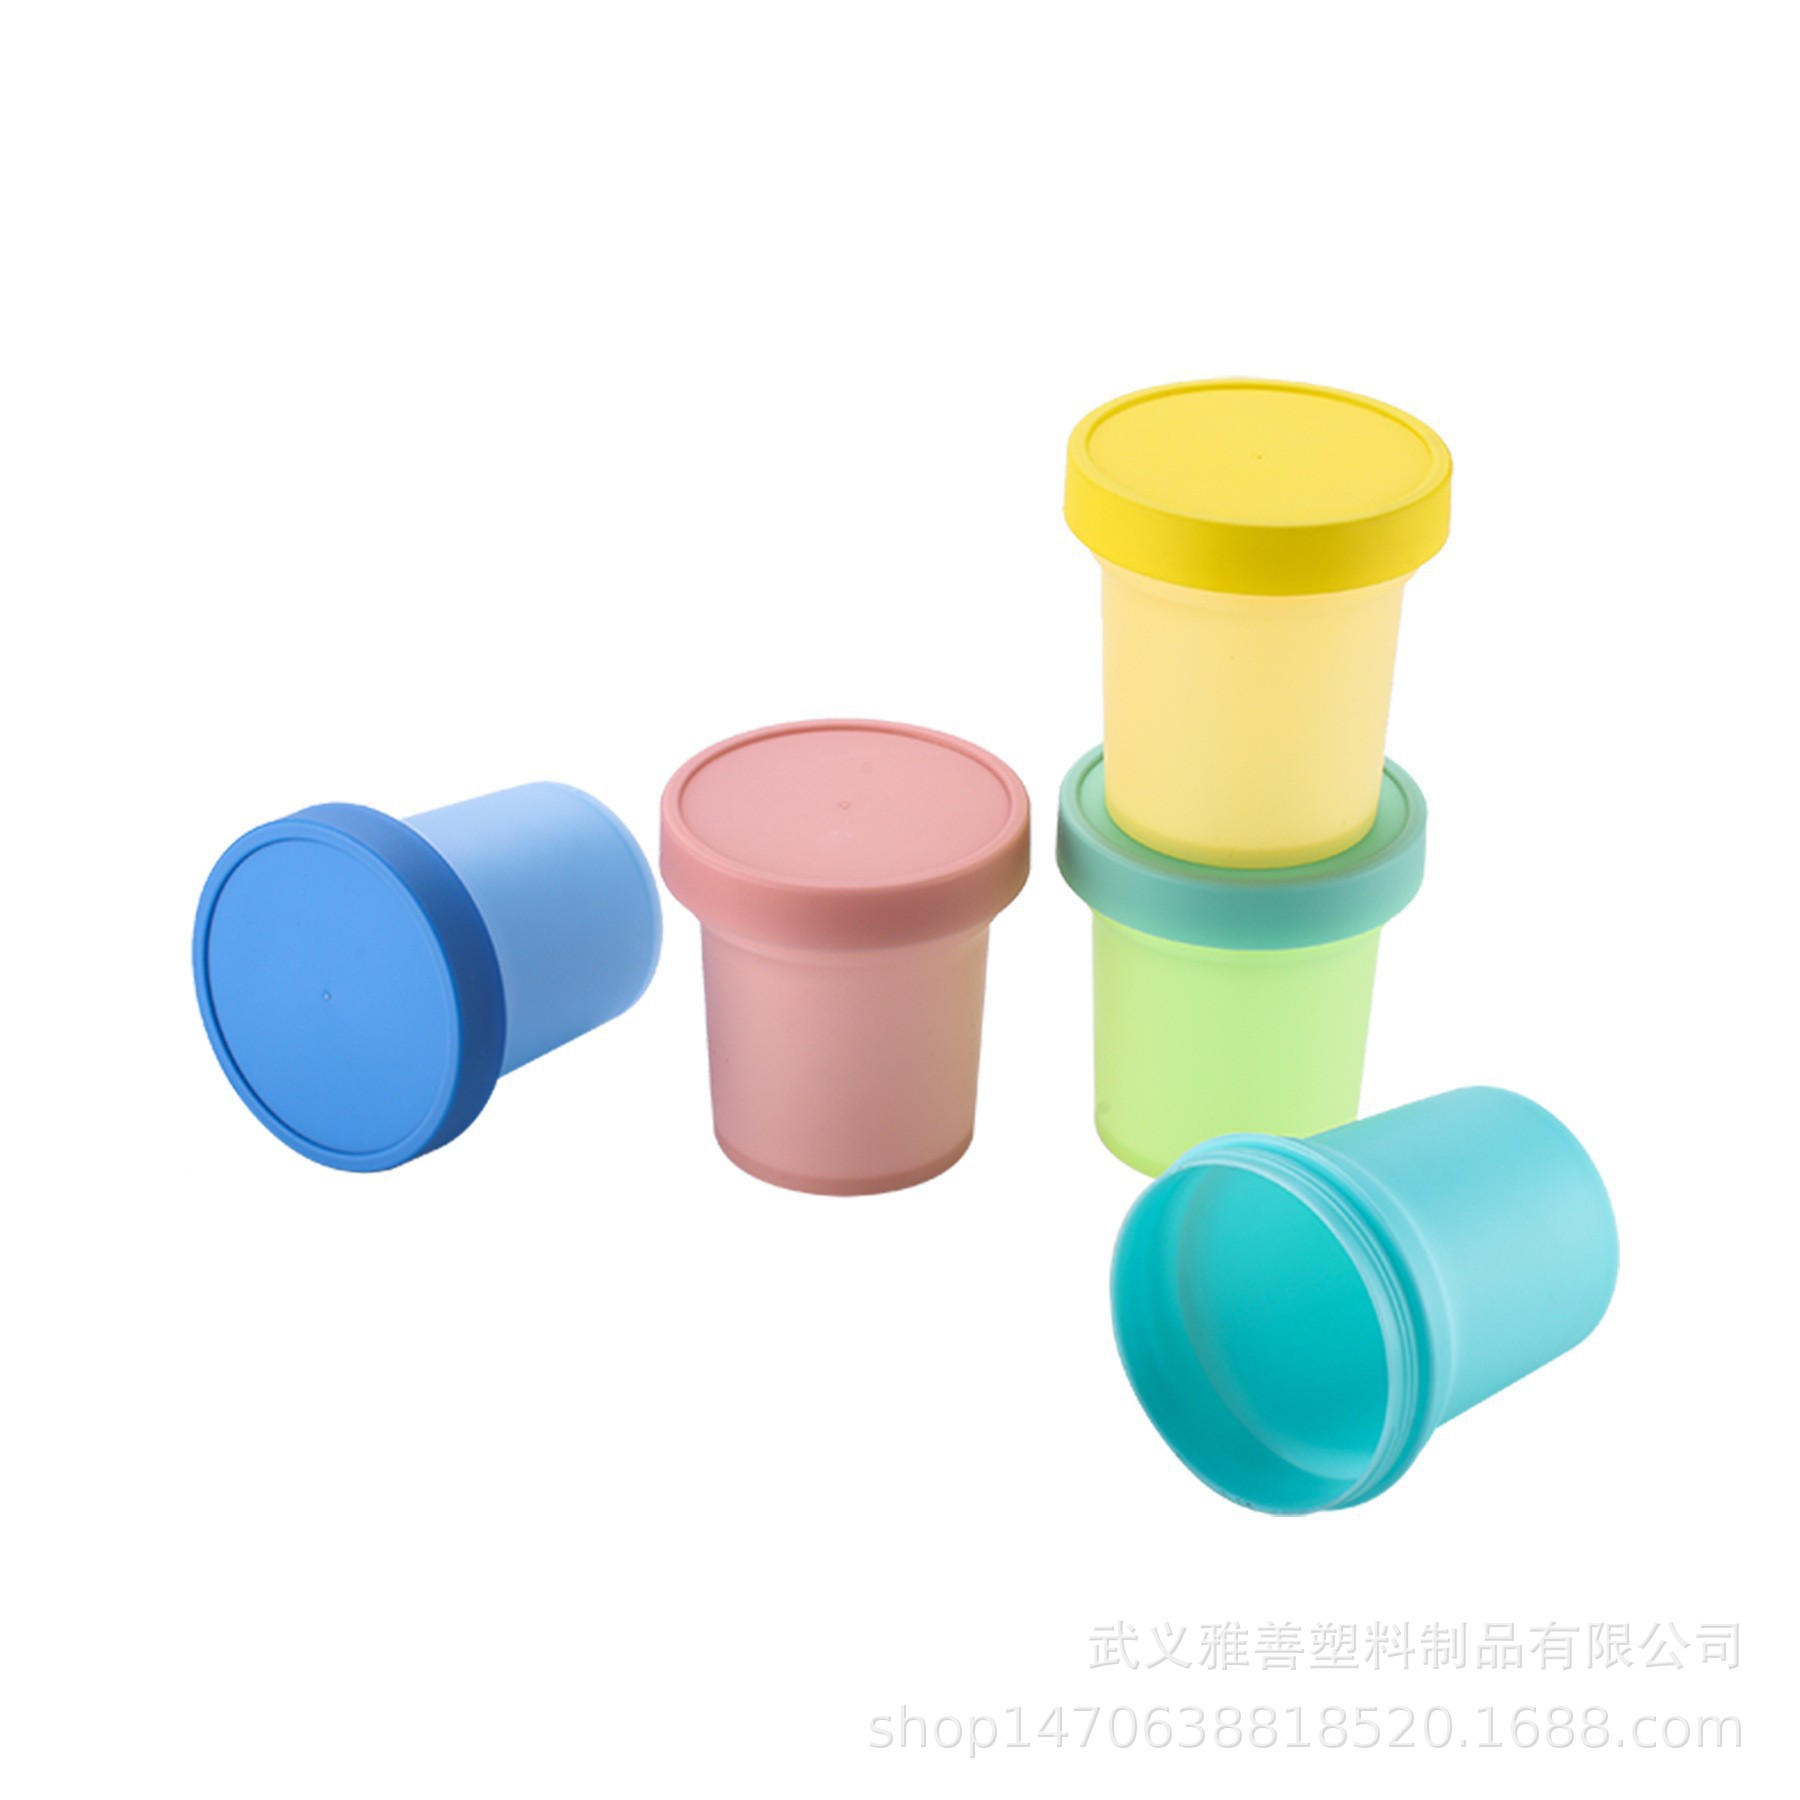 How to quickly identify plastic water cups produced from waste materials